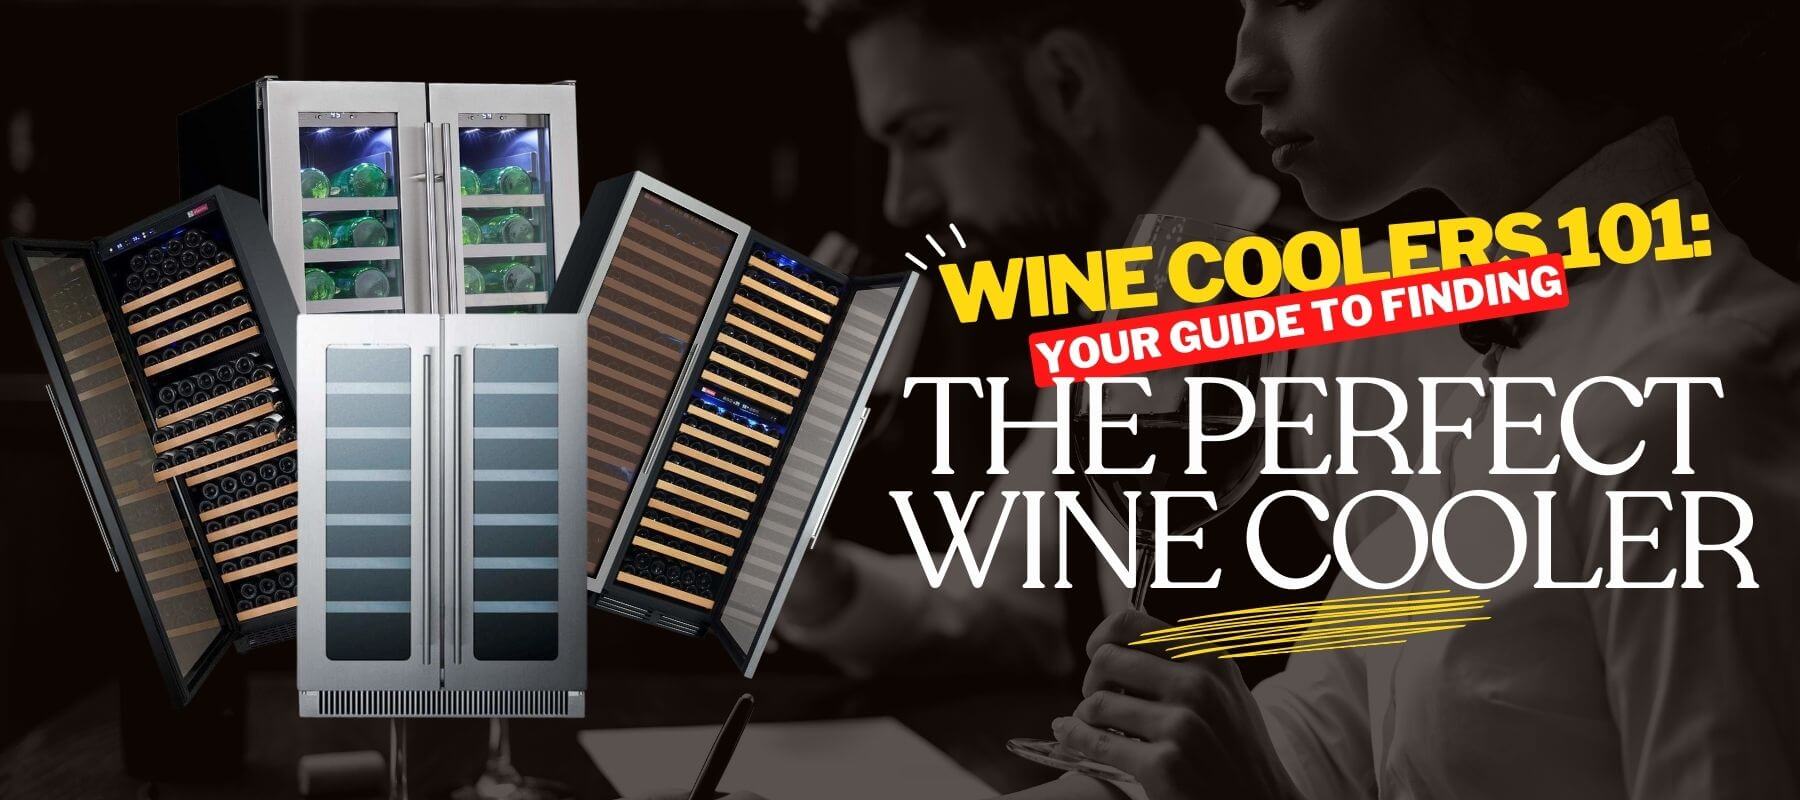 Wine Coolers 101: Your Guide to Finding the Perfect Wine Cooler